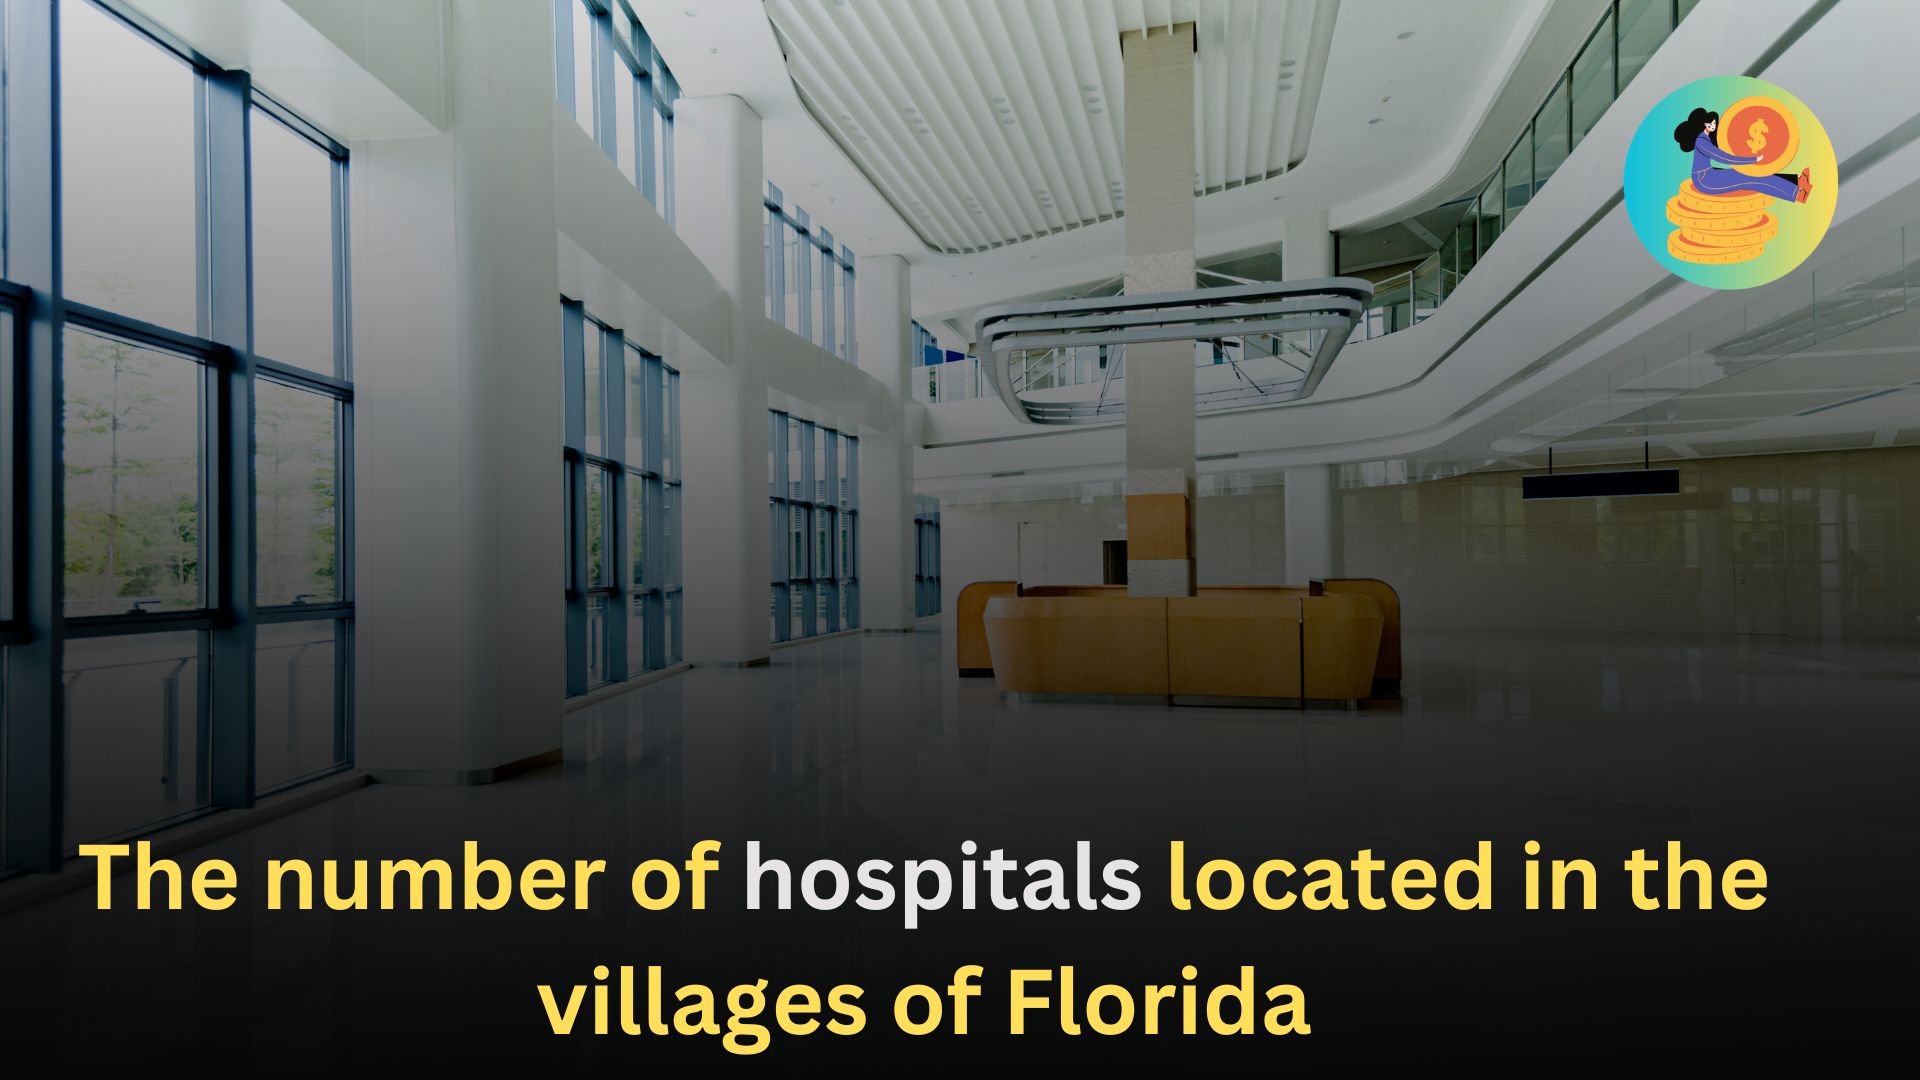 The number of hospitals located in the villages of Florida